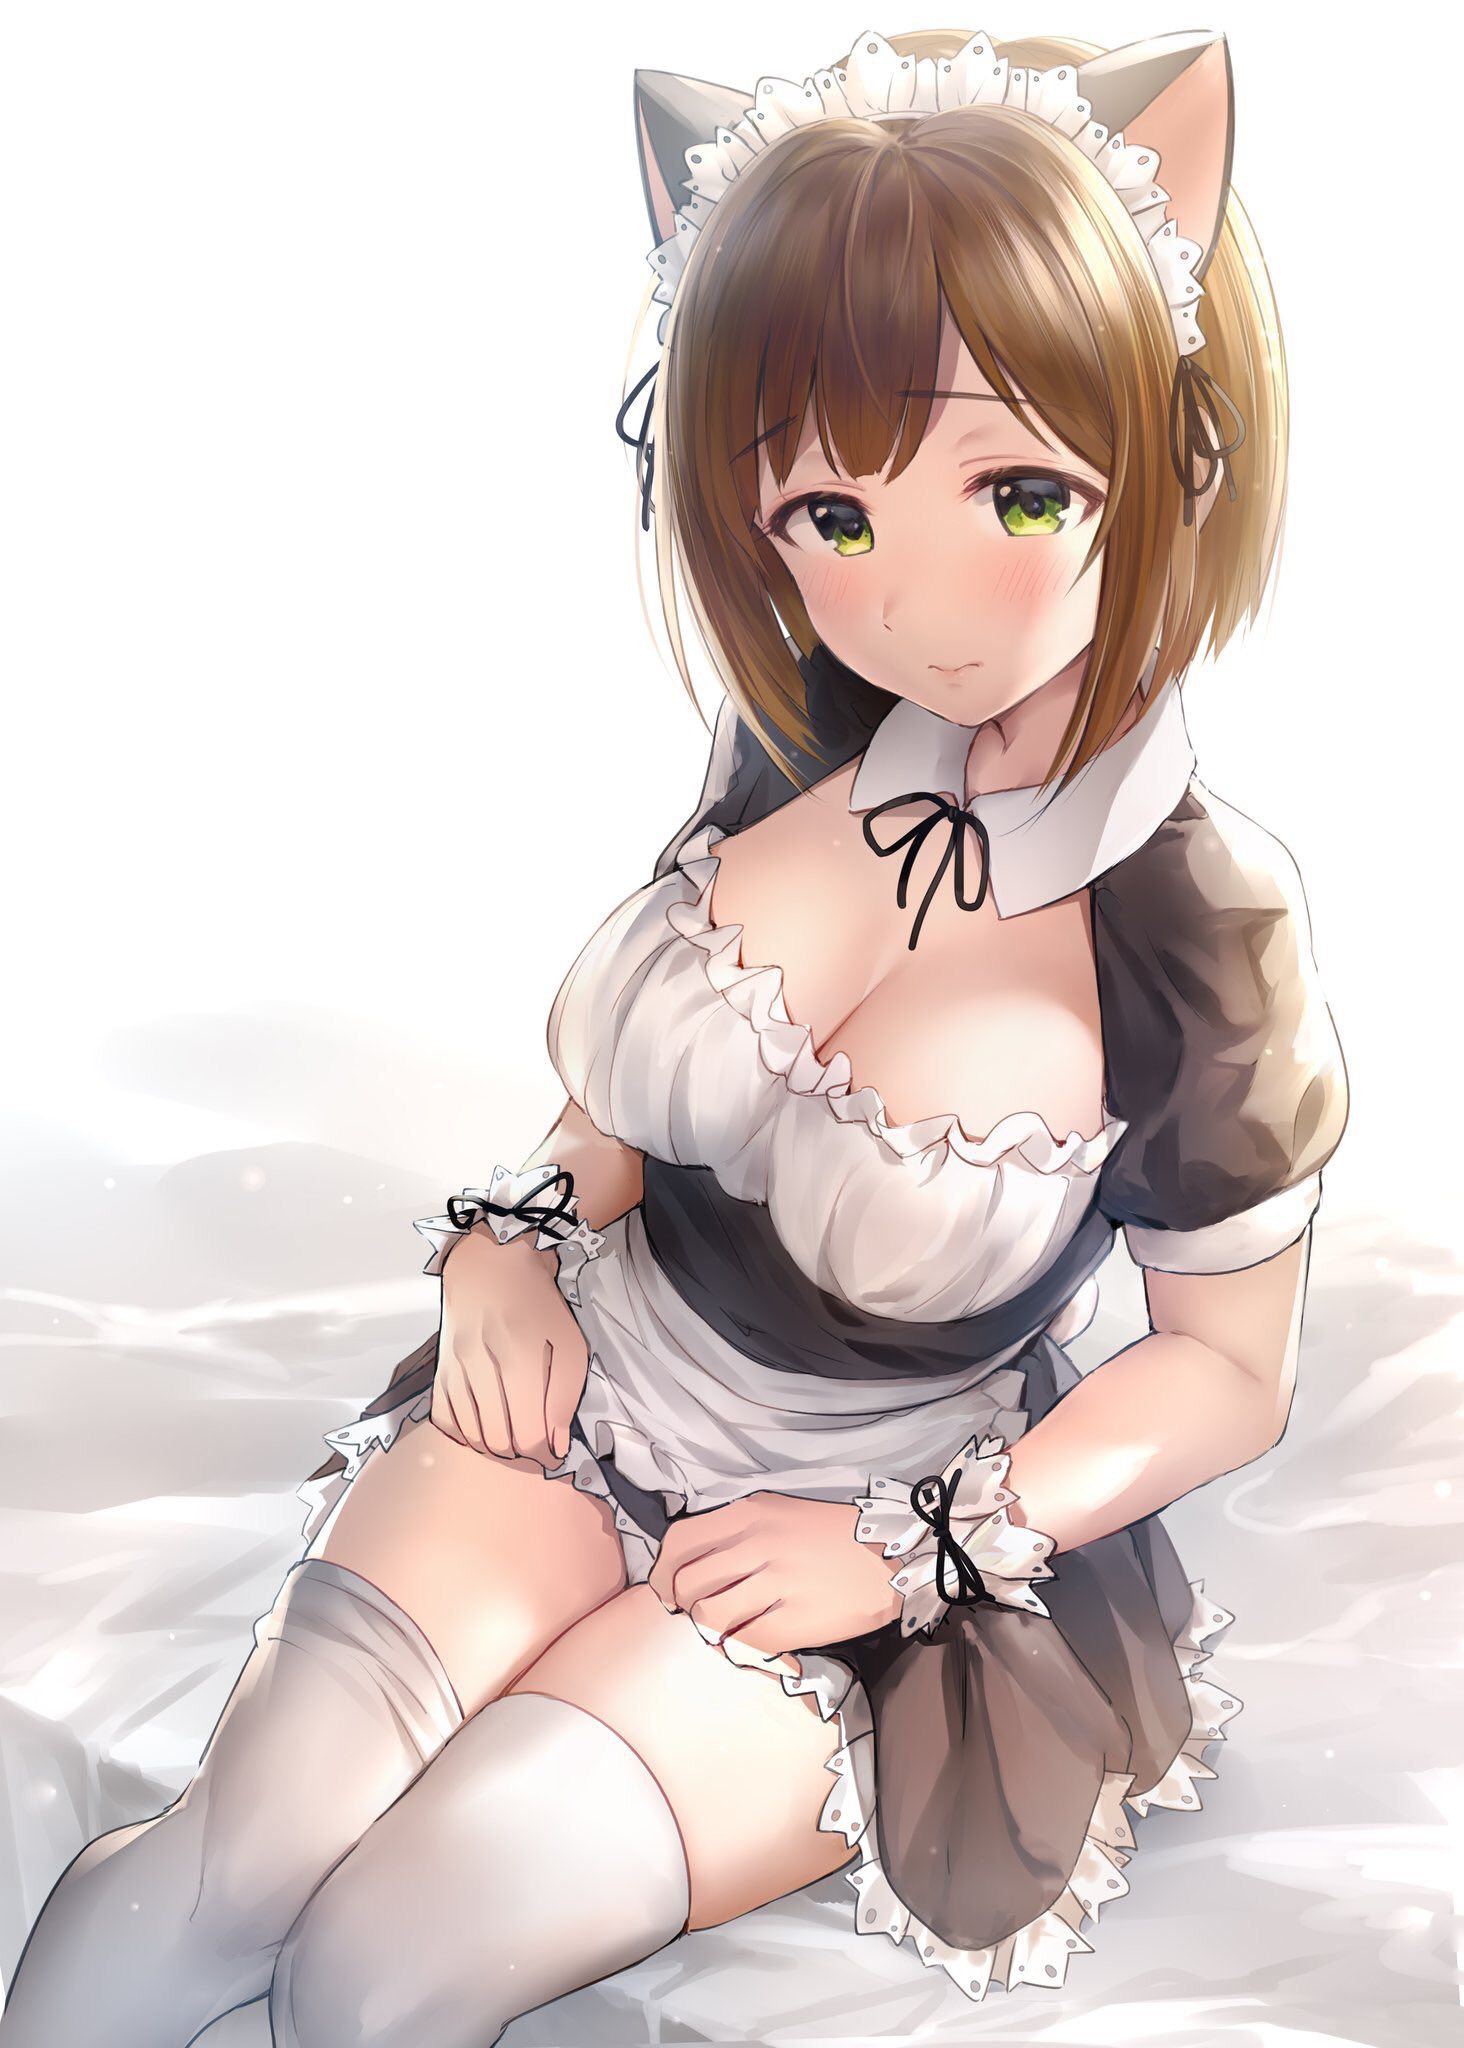 【Erotic Anime Summary】 Valley erotic images of busty beauties 【50 photos】 15